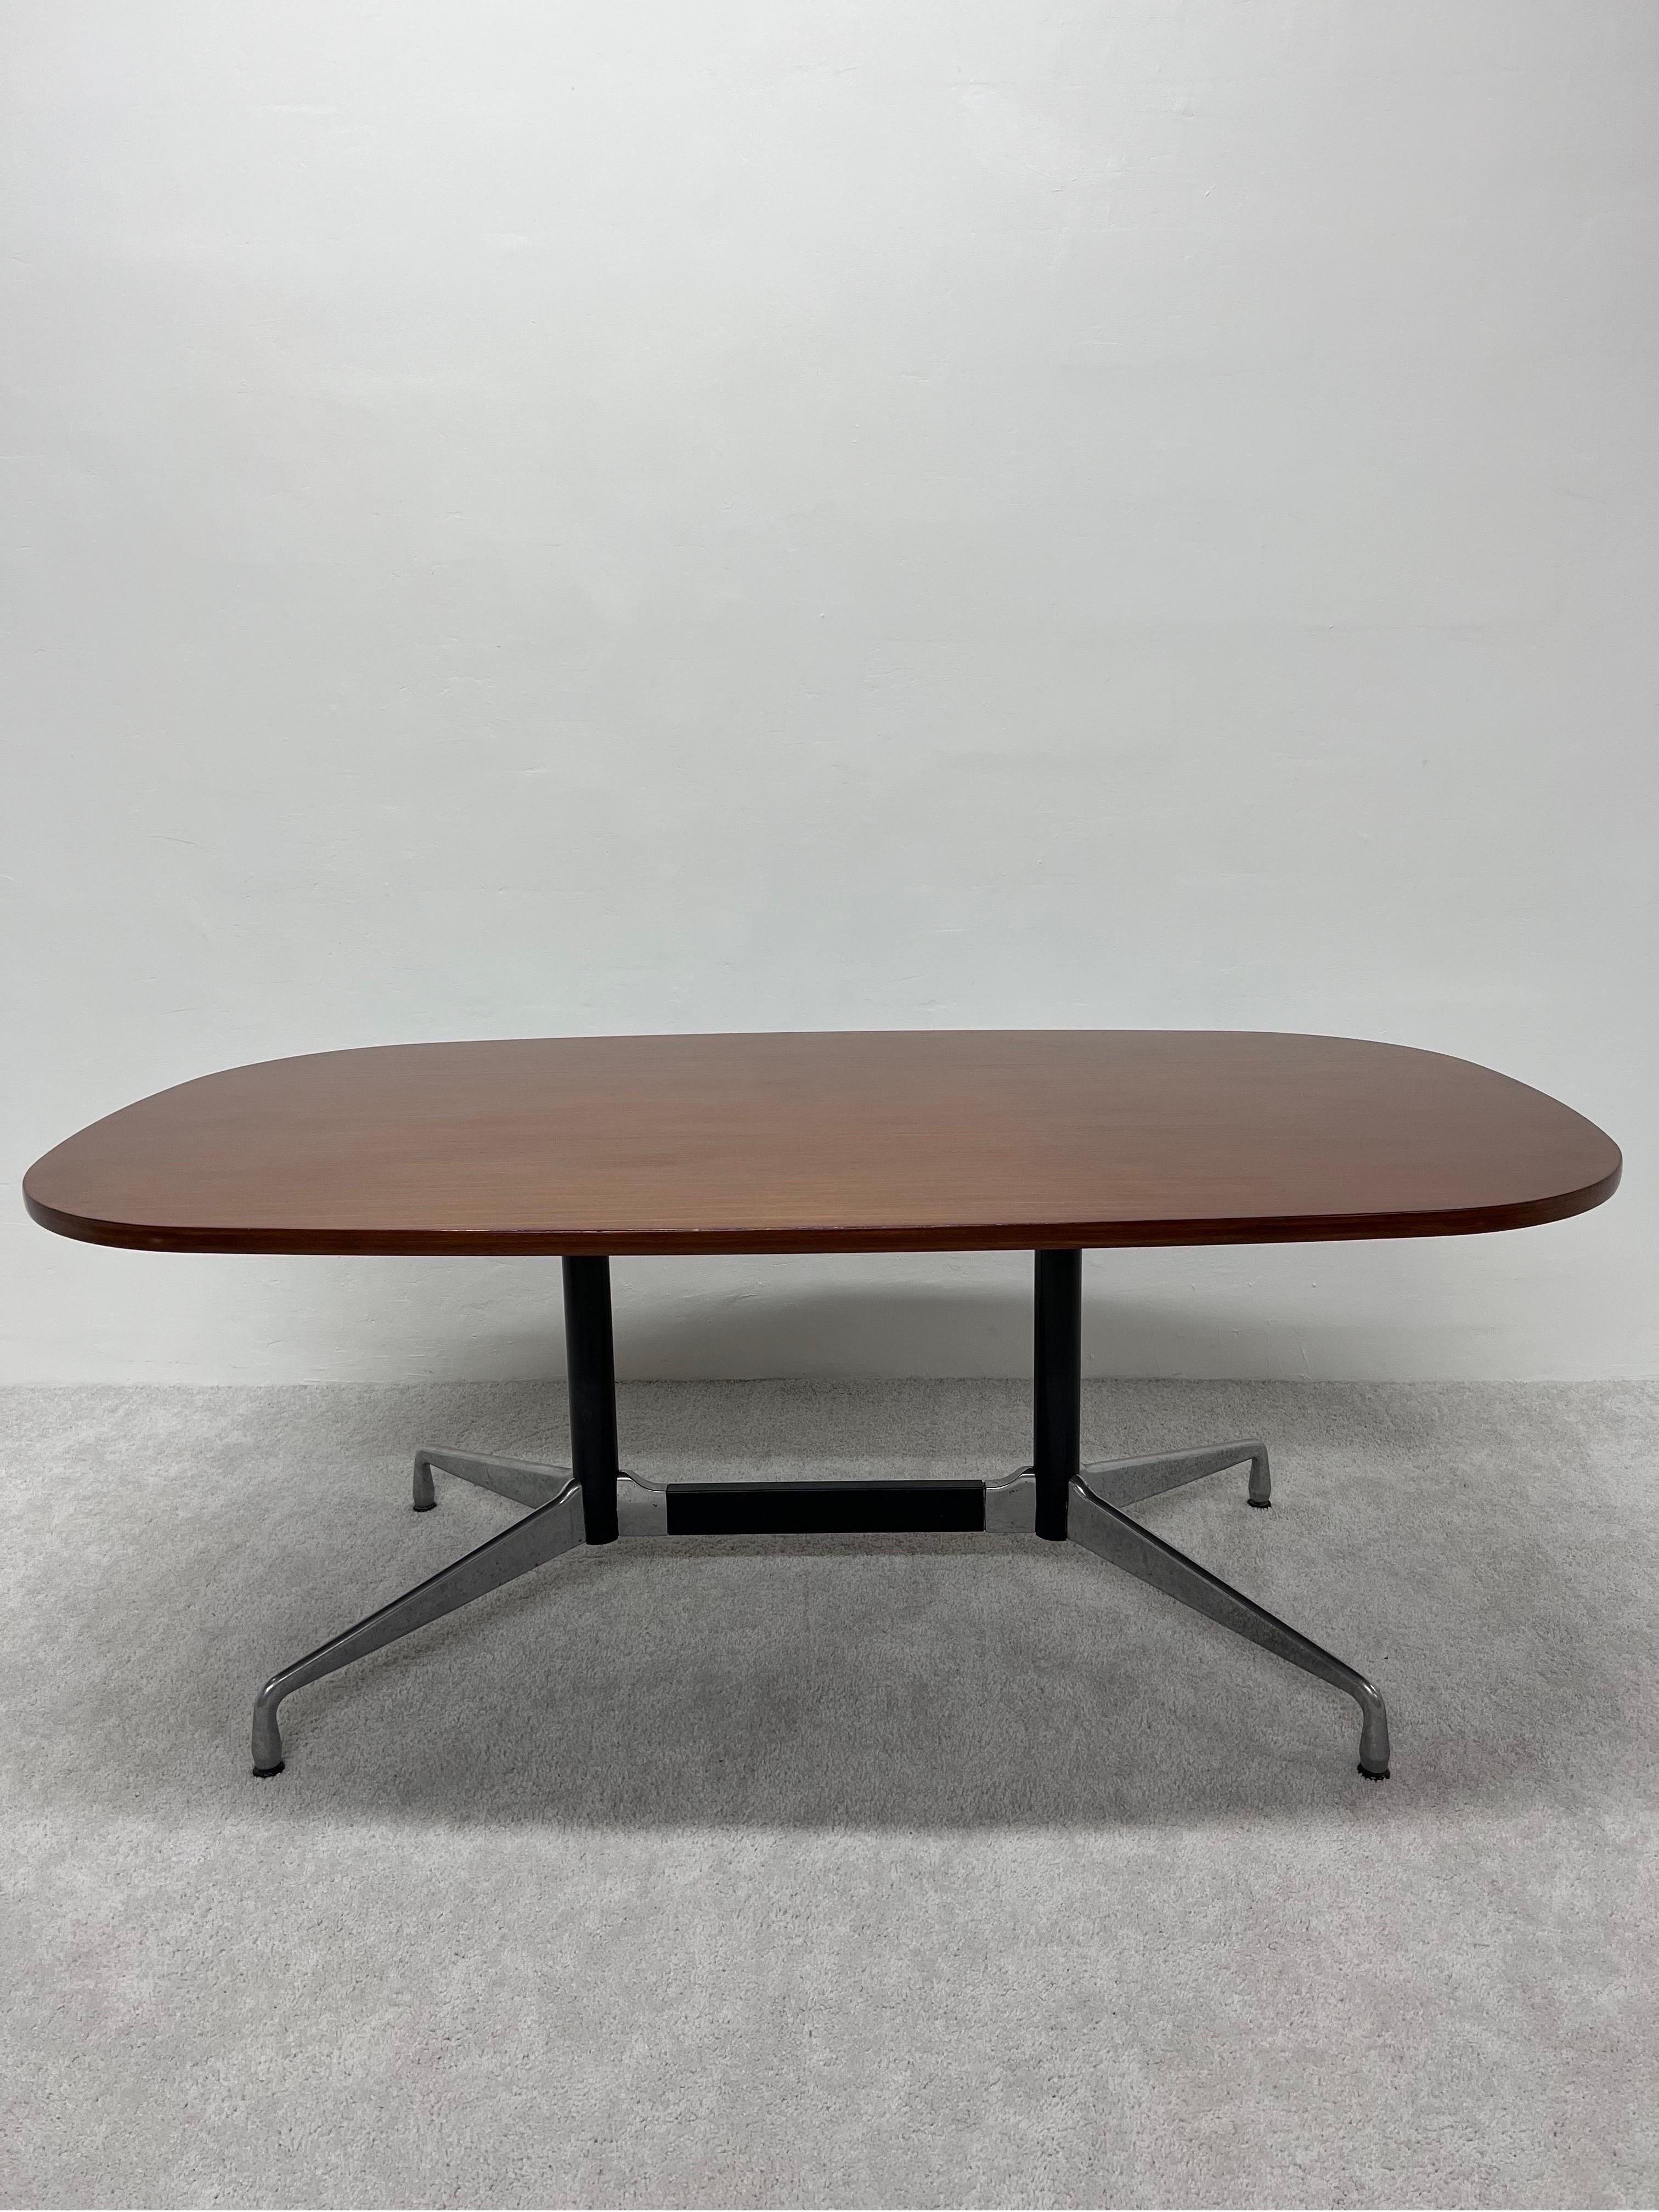 Ray and Charles Eames designed Segmented Base dining or conference table with oval stained white oak natural veneer top and aluminum base for Herman Miller, 1970s. The oak veneer top has been professionally refinished using a satin finish to bring